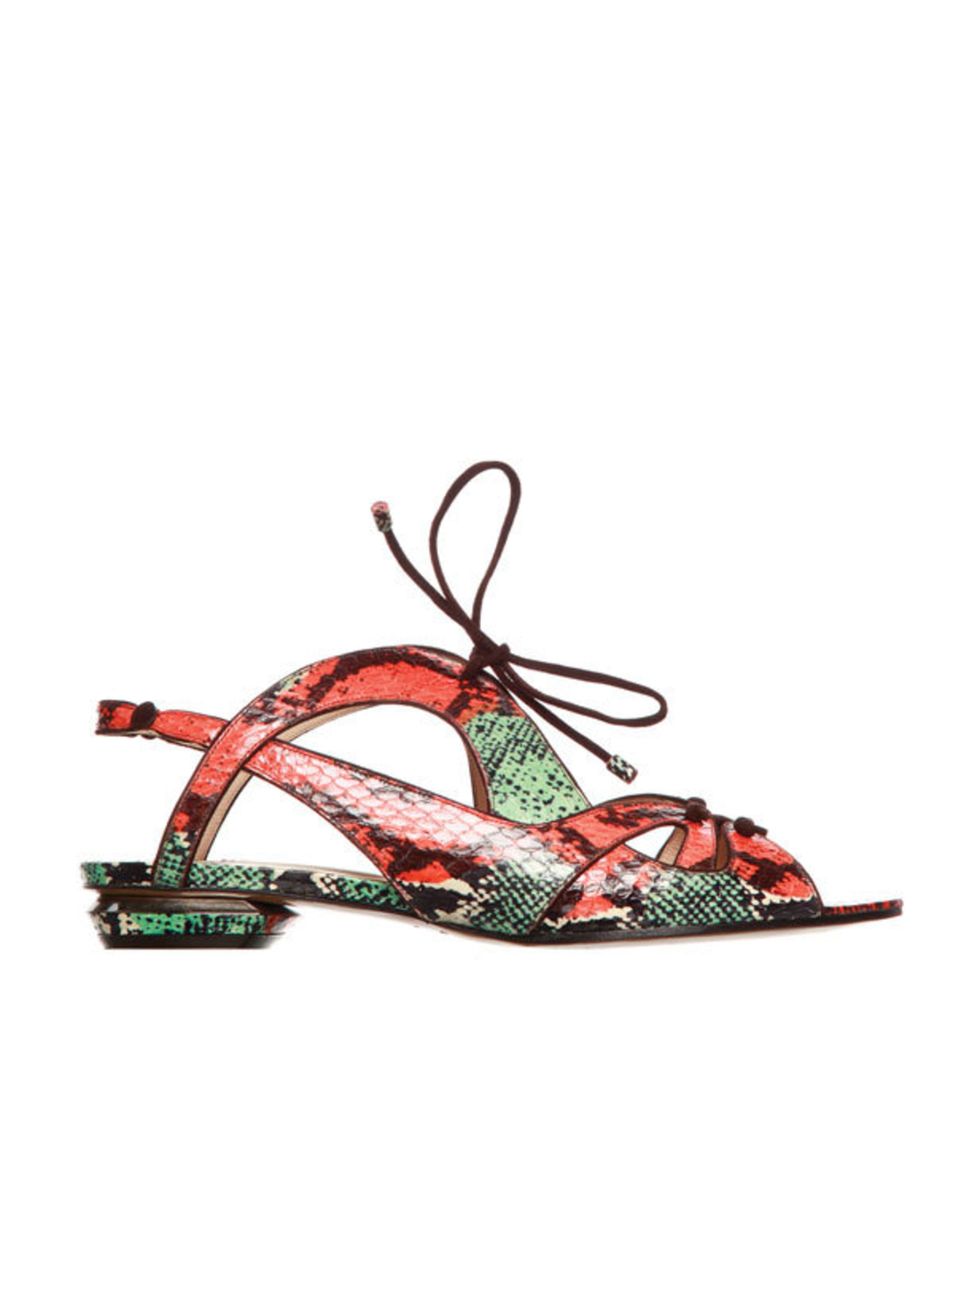 <p>Nicholas Kirkwood leather watersnake sandals,£645, for stockists call 0207 290 1404</p>